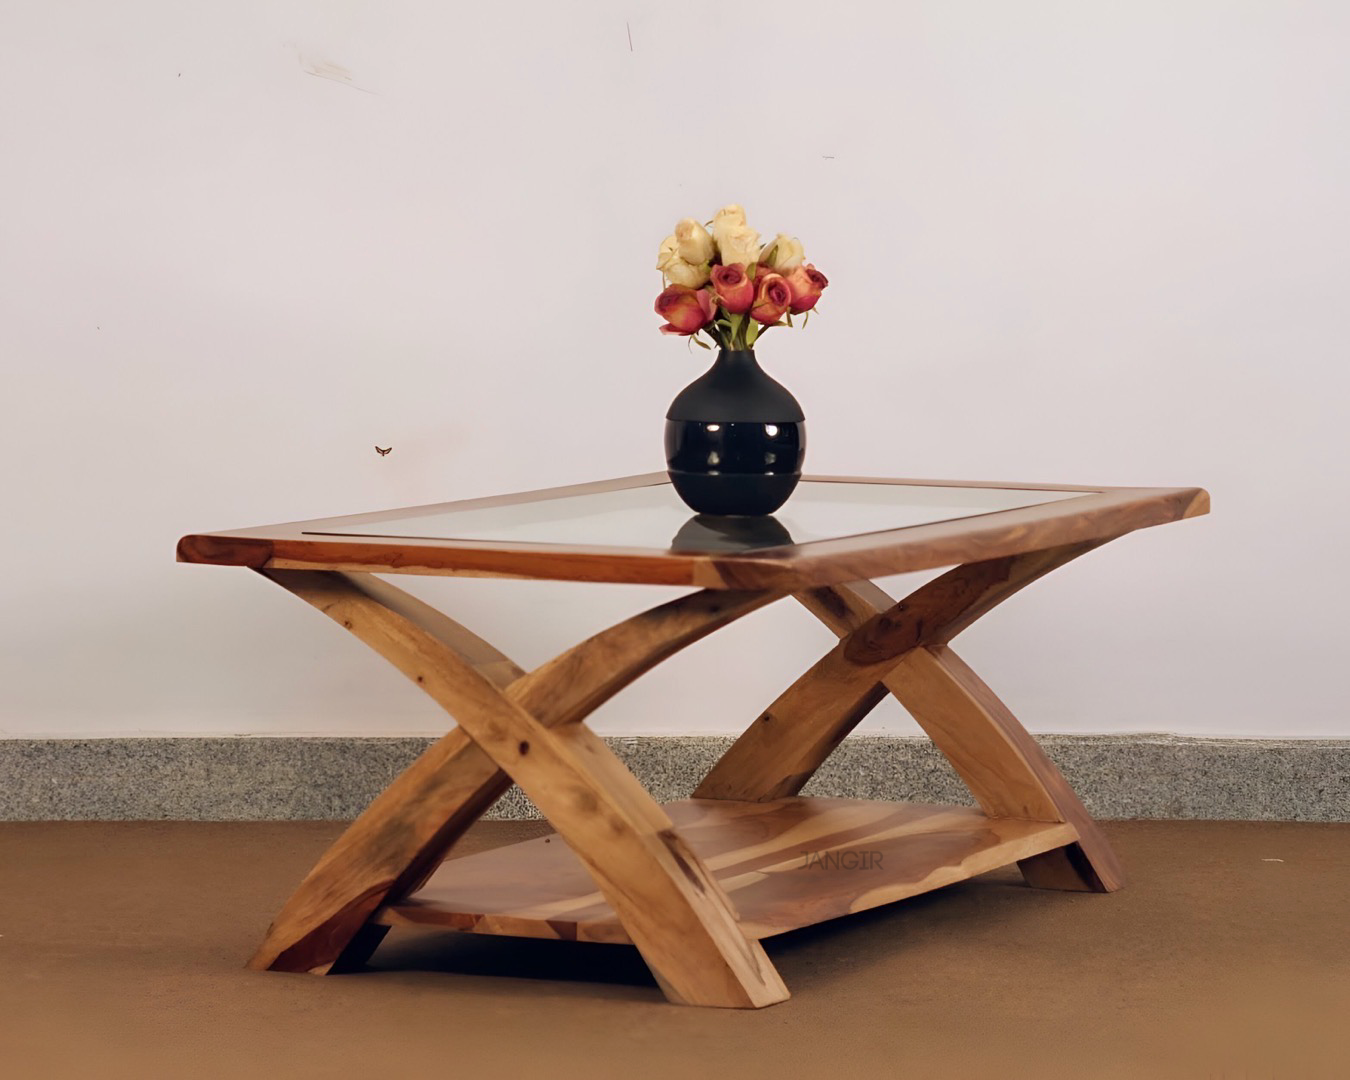 Transform your living room with our designer coffee table with open storage and a glass top. Made with sheesham wood. Elevate your home decor with our   center tables near you in Bangalore, Shop Now